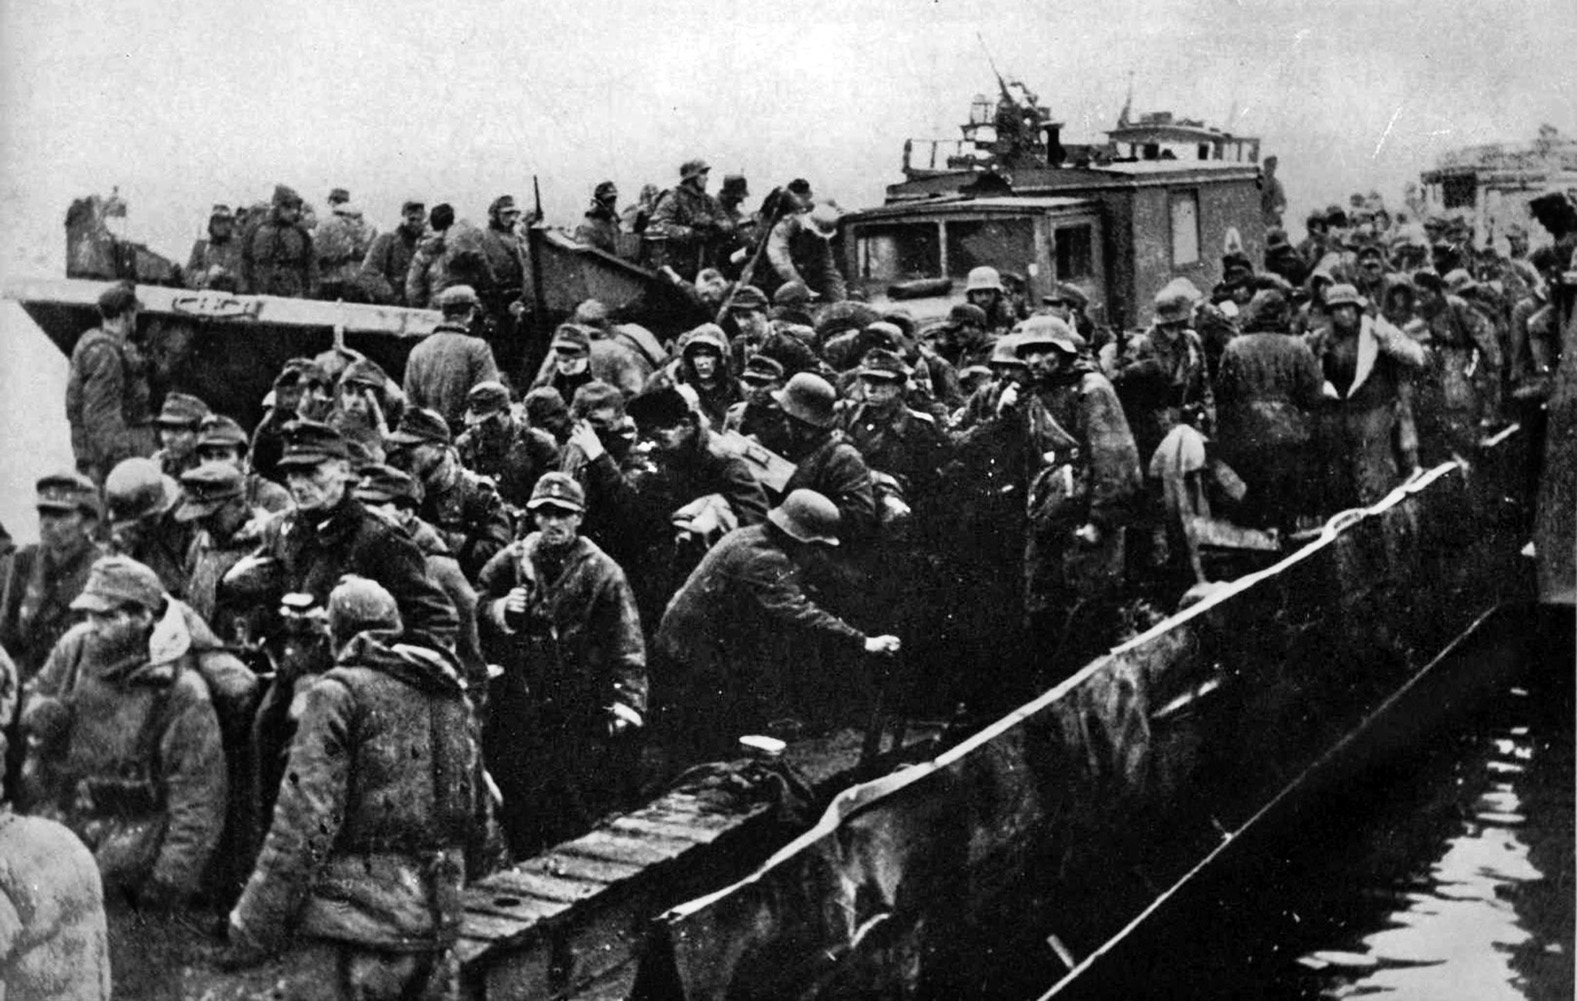 Grand Admiral Dönitz defied Hitler’s “no retreat, no surrender” orders and pulled German ground units (shown here piling into small boats) out of the Courland Pocket to be repositioned further west in accordance with Operation Hannibal. 